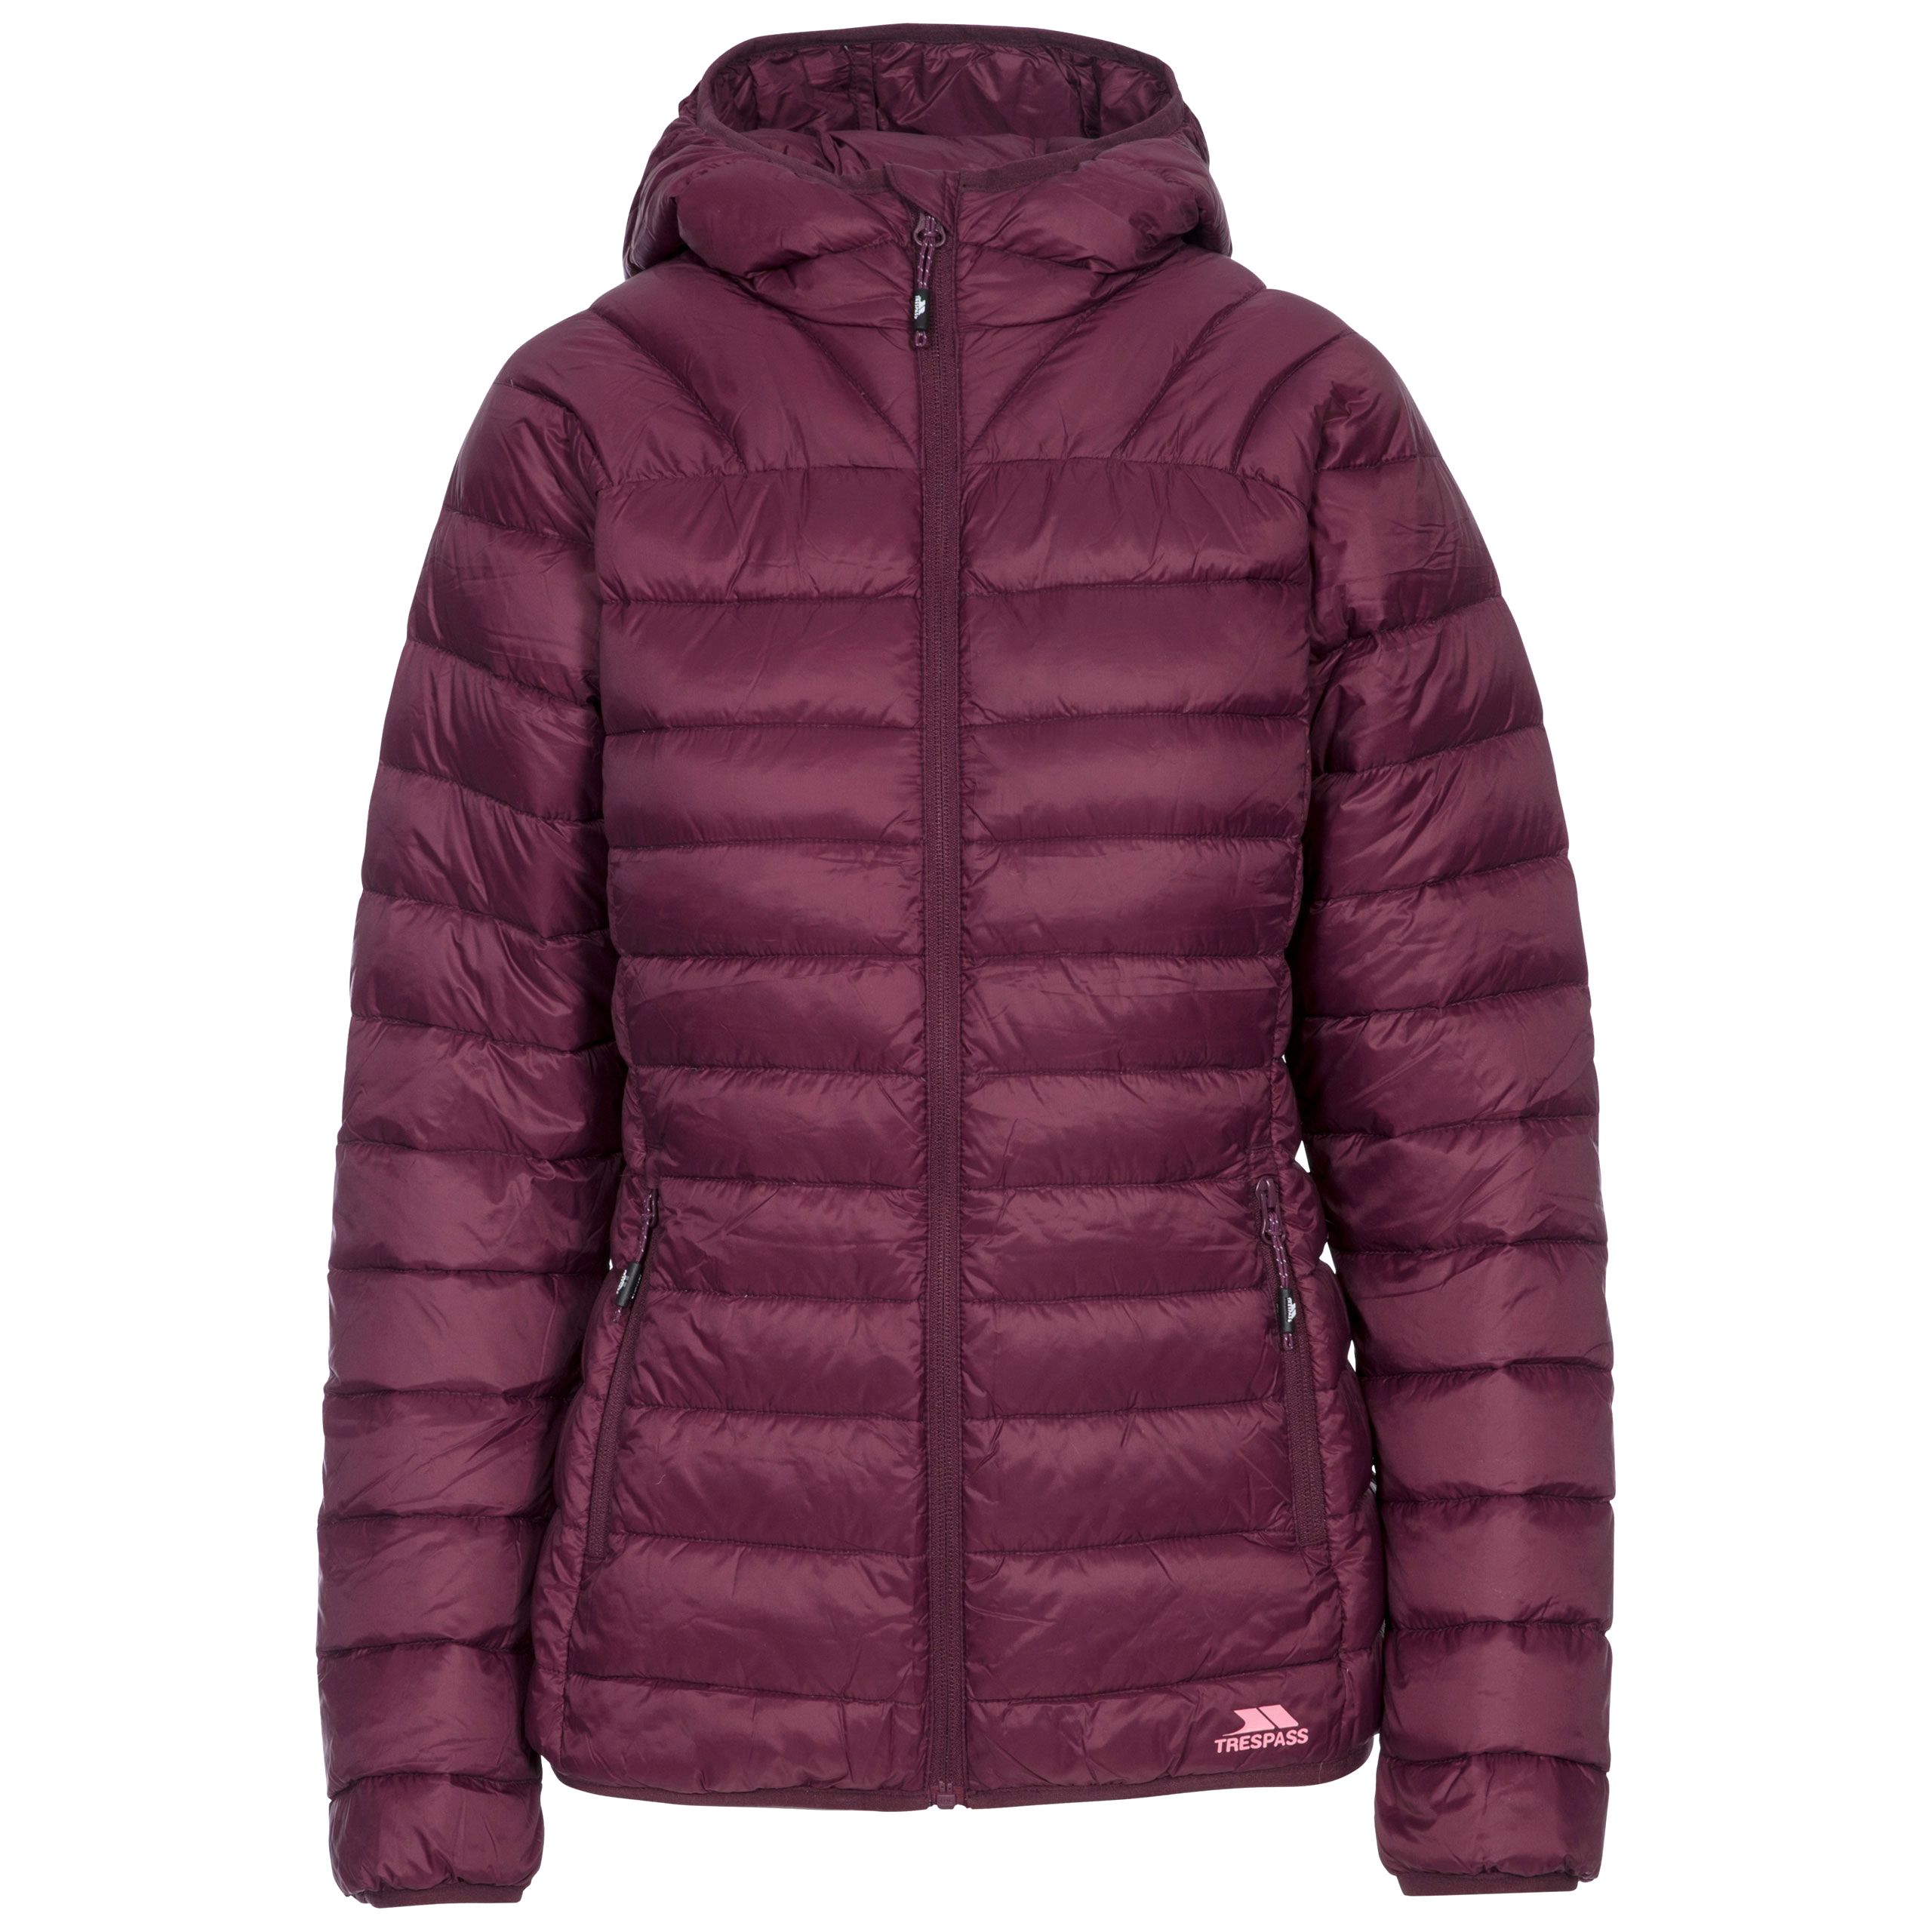 Ultra lightweight jacket with grown on hood and 2 lower zipped pockets. Low profile front zip. Stuff sack in pocket. Matching binding at hood, cuffs and hem. Shell: 100% polyamide. Lining: 100% polyamide. Filling: 90% down, 10% feathers. Trespass Womens Chest Sizing (approx): XS/8 - 32in/81cm, S/10 - 34in/86cm, M/12 - 36in/91.4cm, L/14 - 38in/96.5cm, XL/16 - 40in/101.5cm, XXL/18 - 42in/106.5cm.